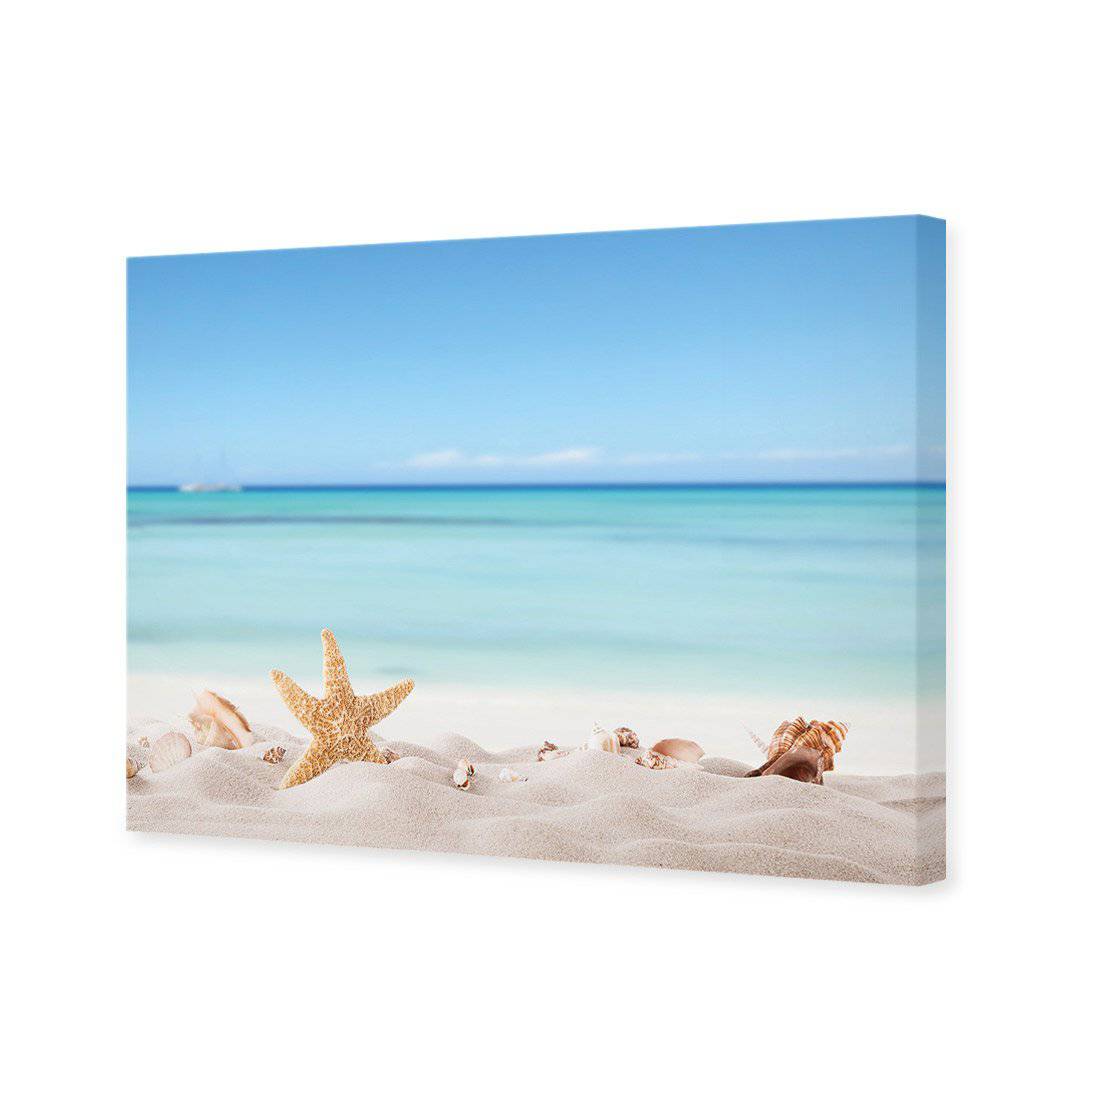 Starfish and Friends Canvas Art-Canvas-Wall Art Designs-45x30cm-Canvas - No Frame-Wall Art Designs